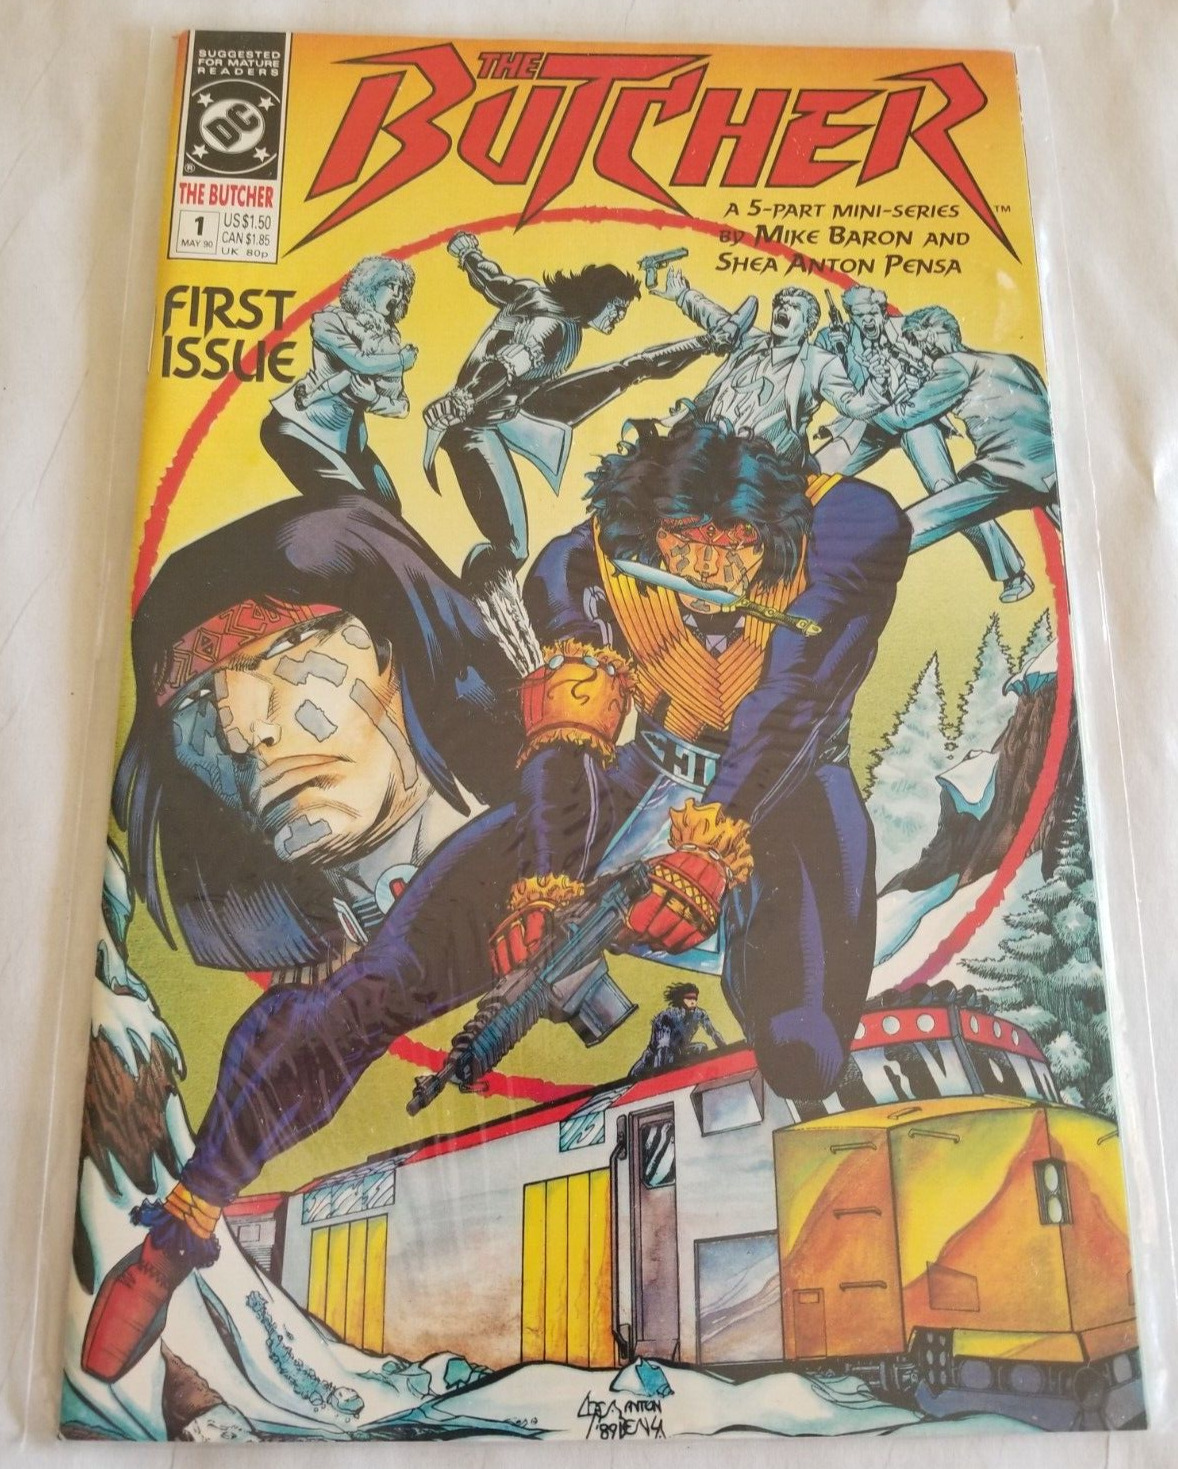 THE BUTCHER No. 1 May 1990 DC Comics First Issue / Ungraded, Excellent Condition